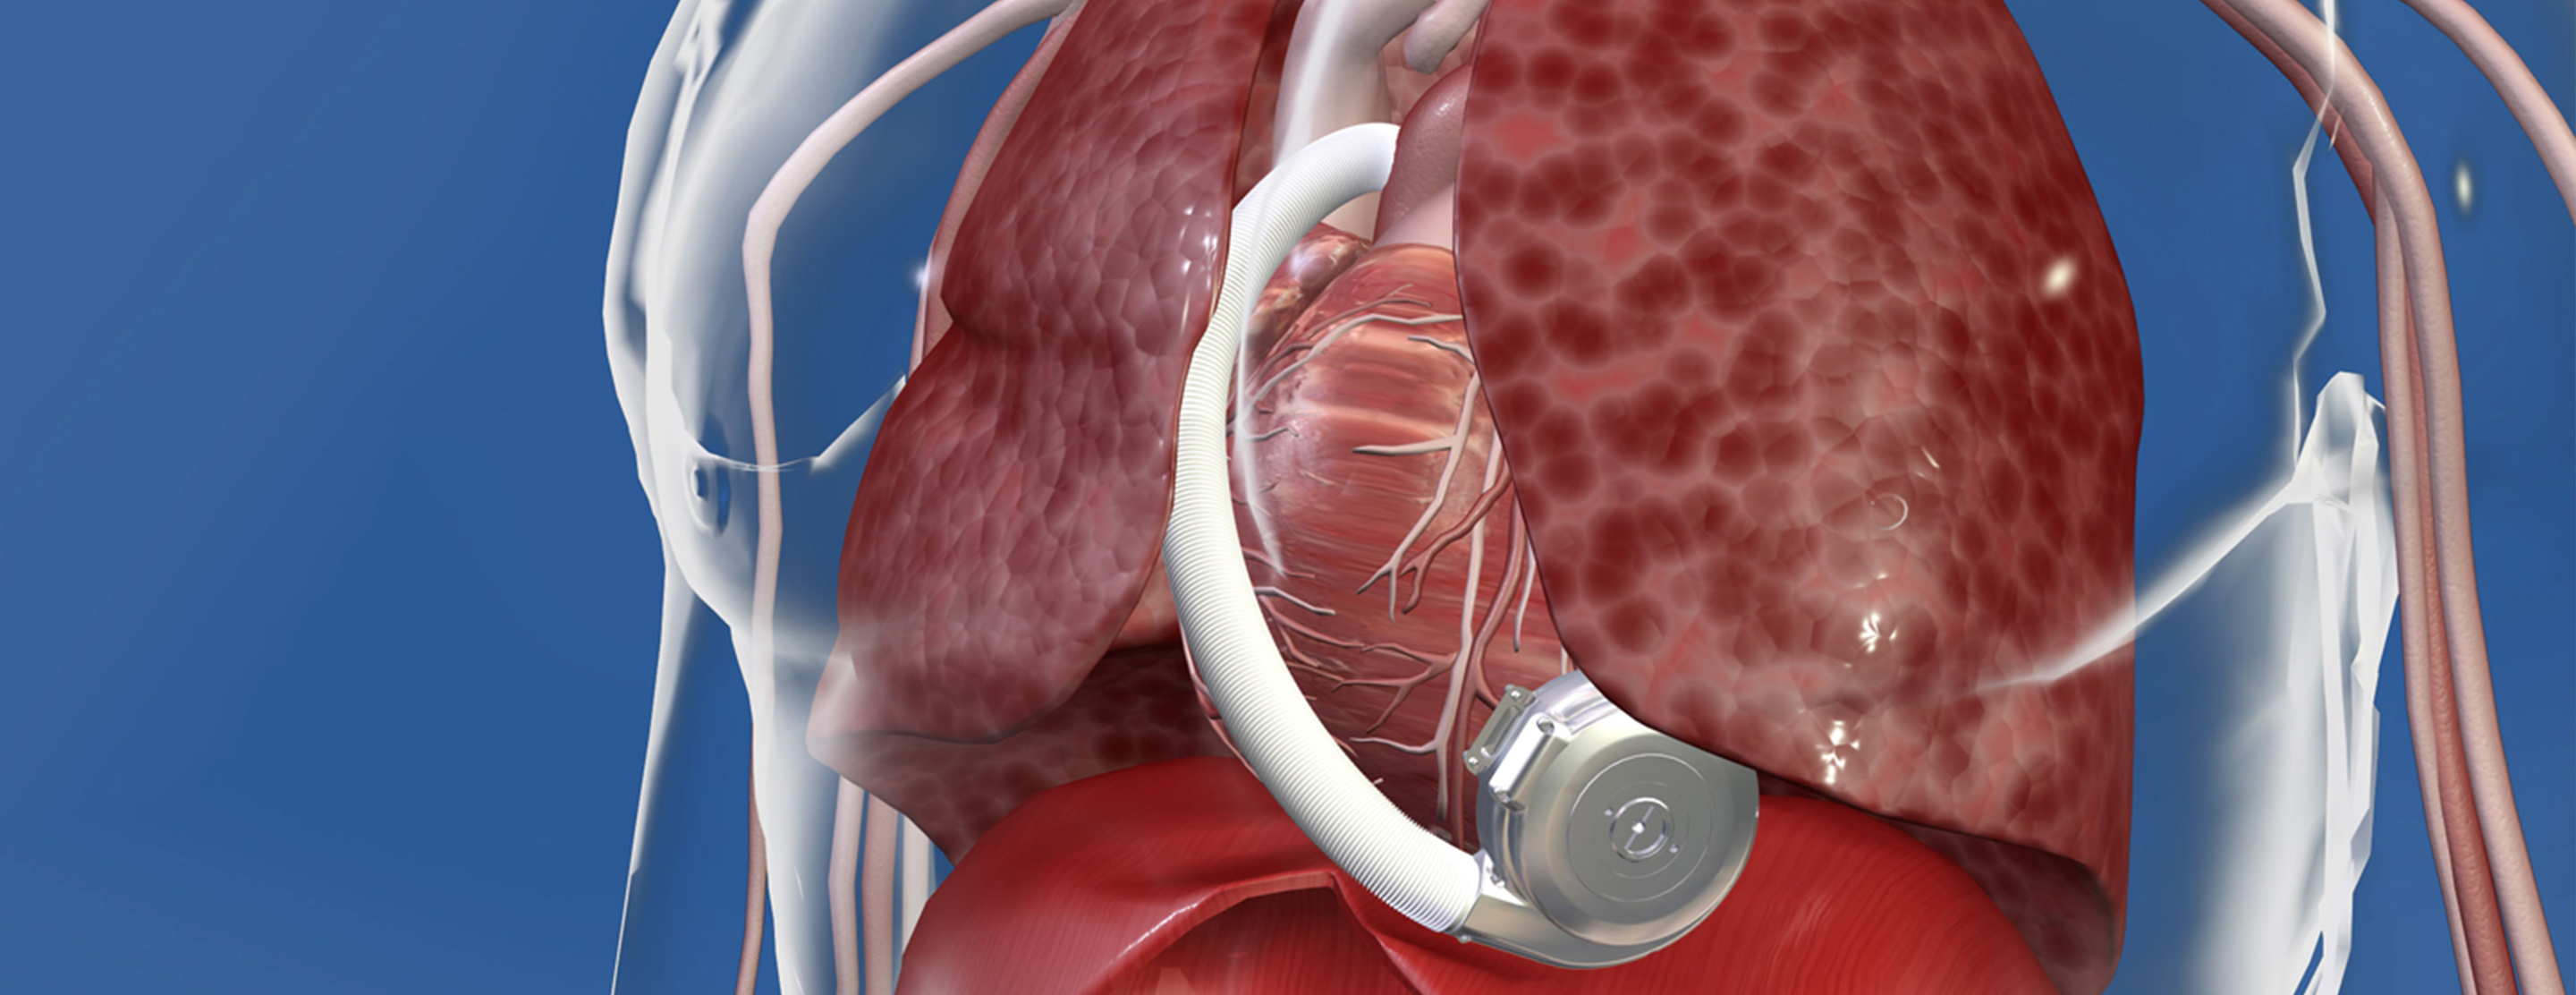 Ventricular Assist Device (VAD) | Conditions & Treatments | UCSF Health